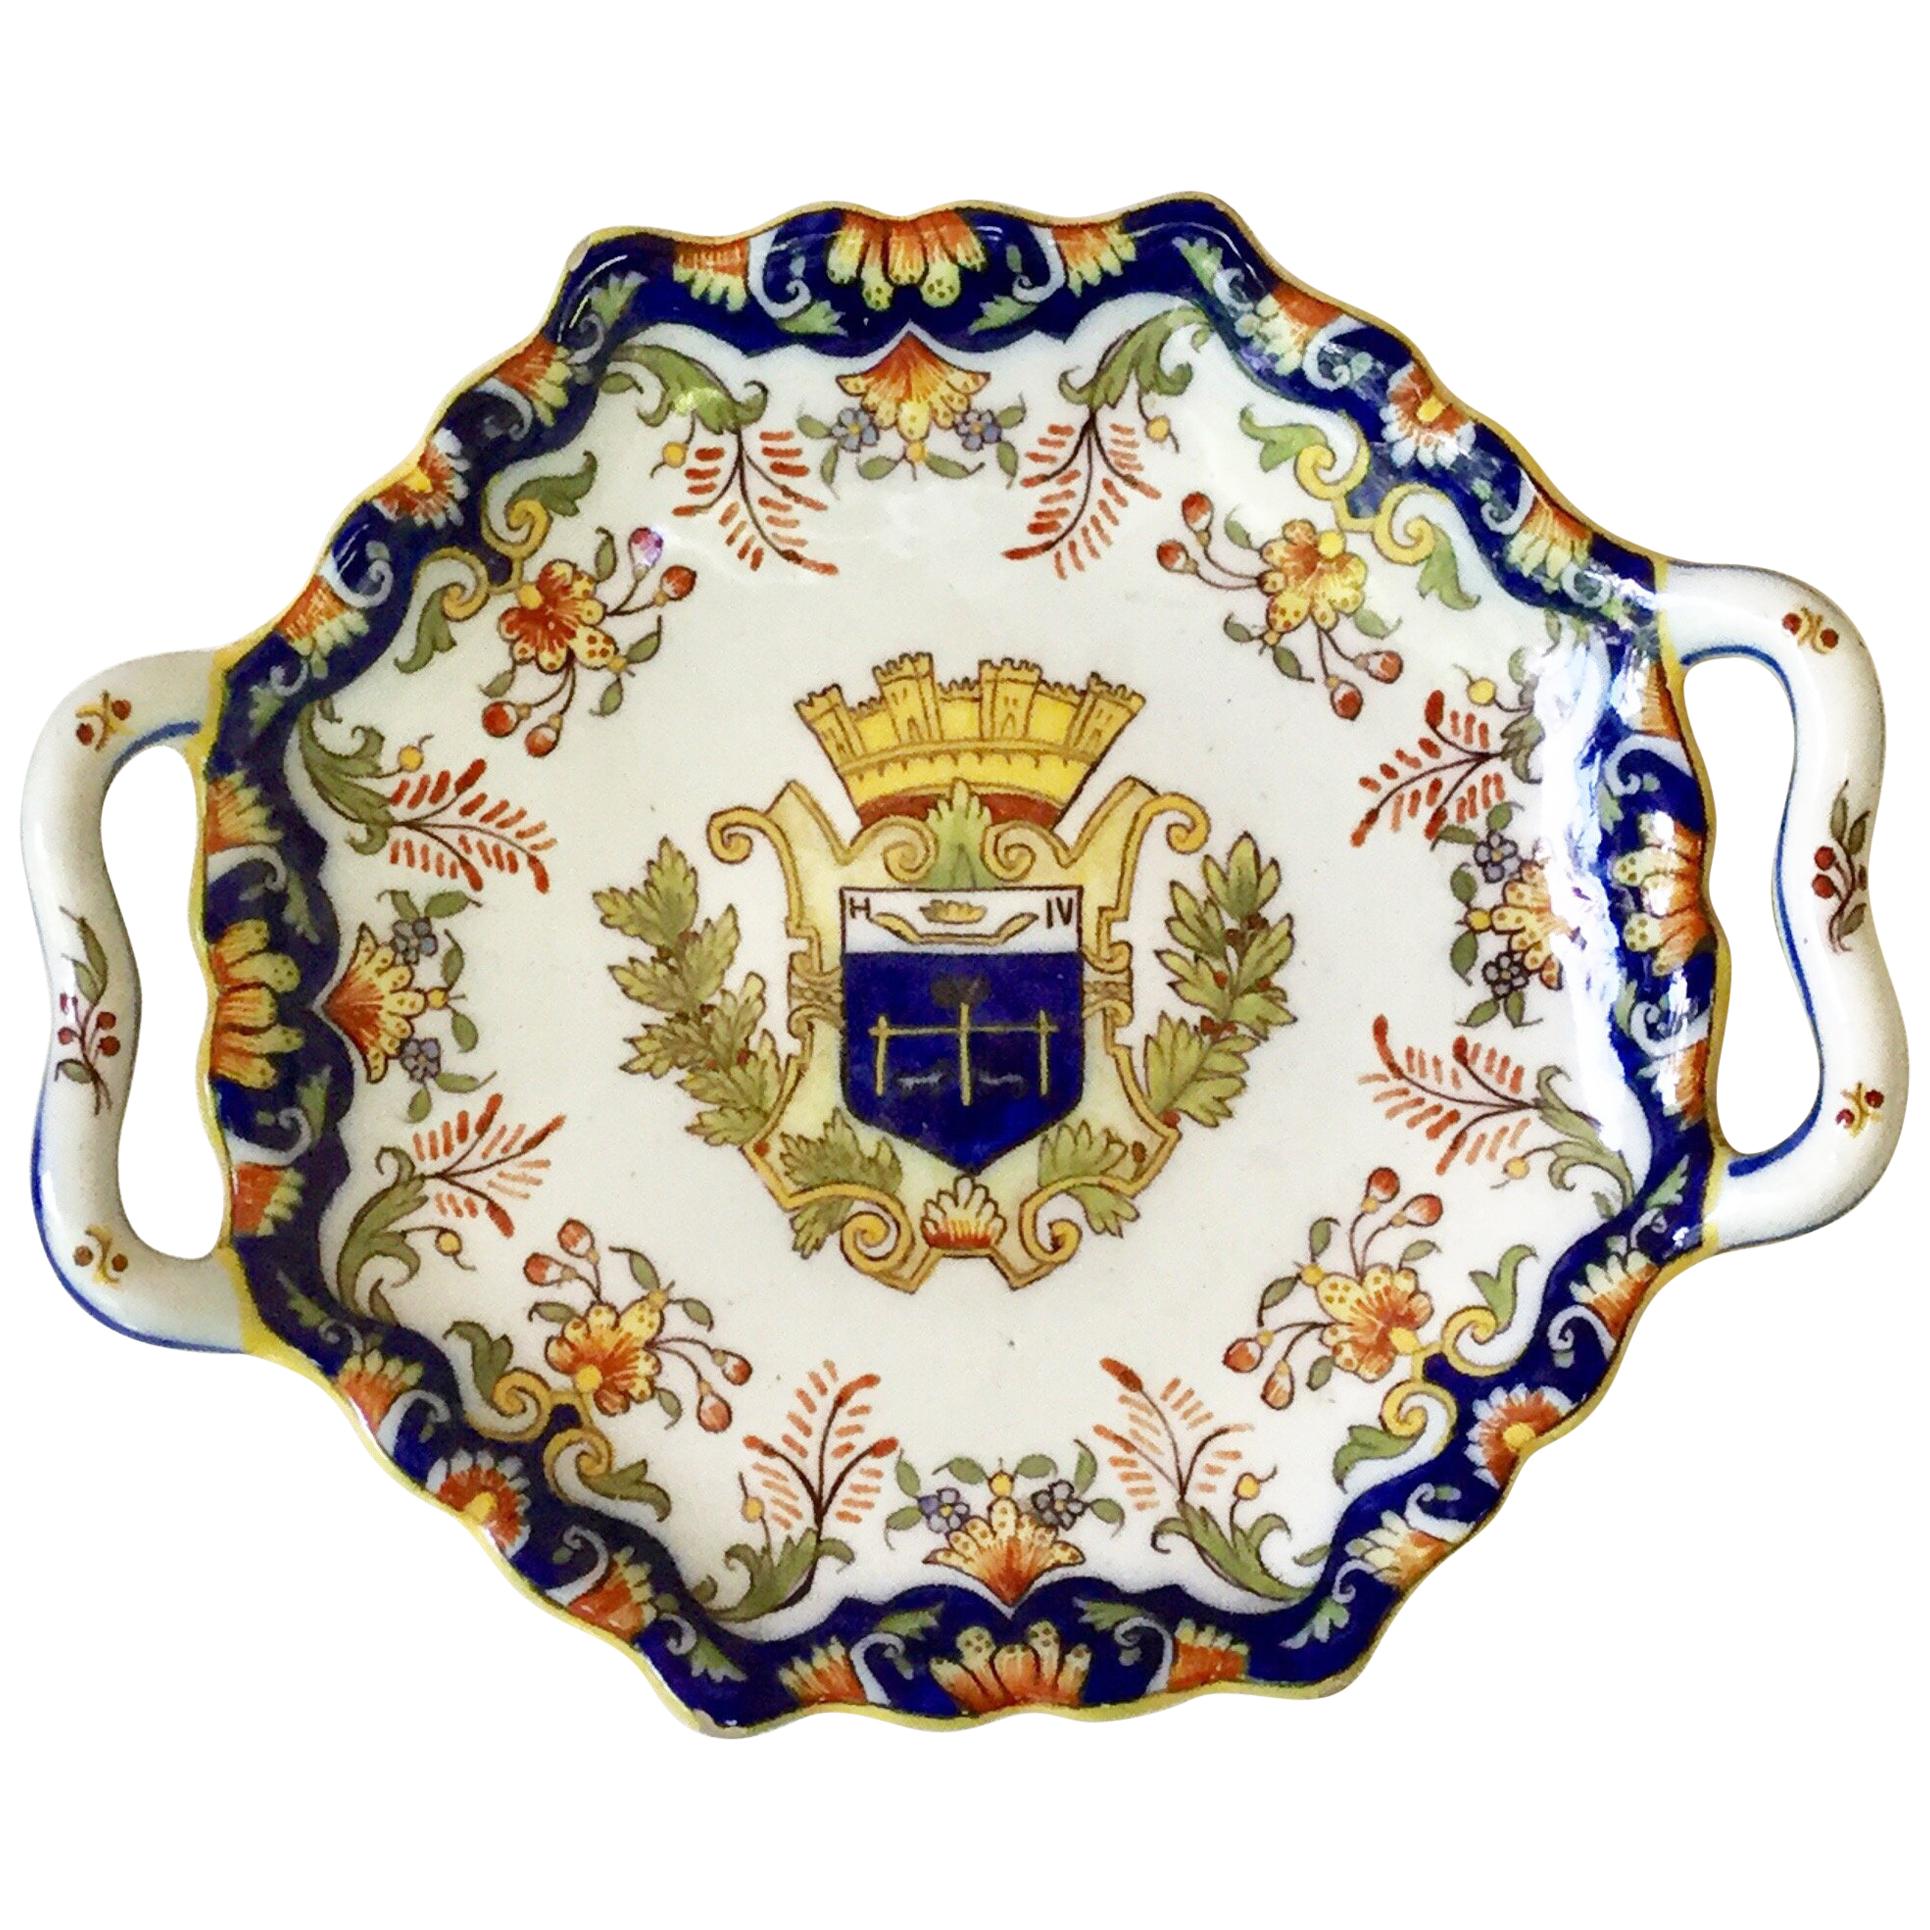 French Faience Handled Platter Desvres, circa 1900